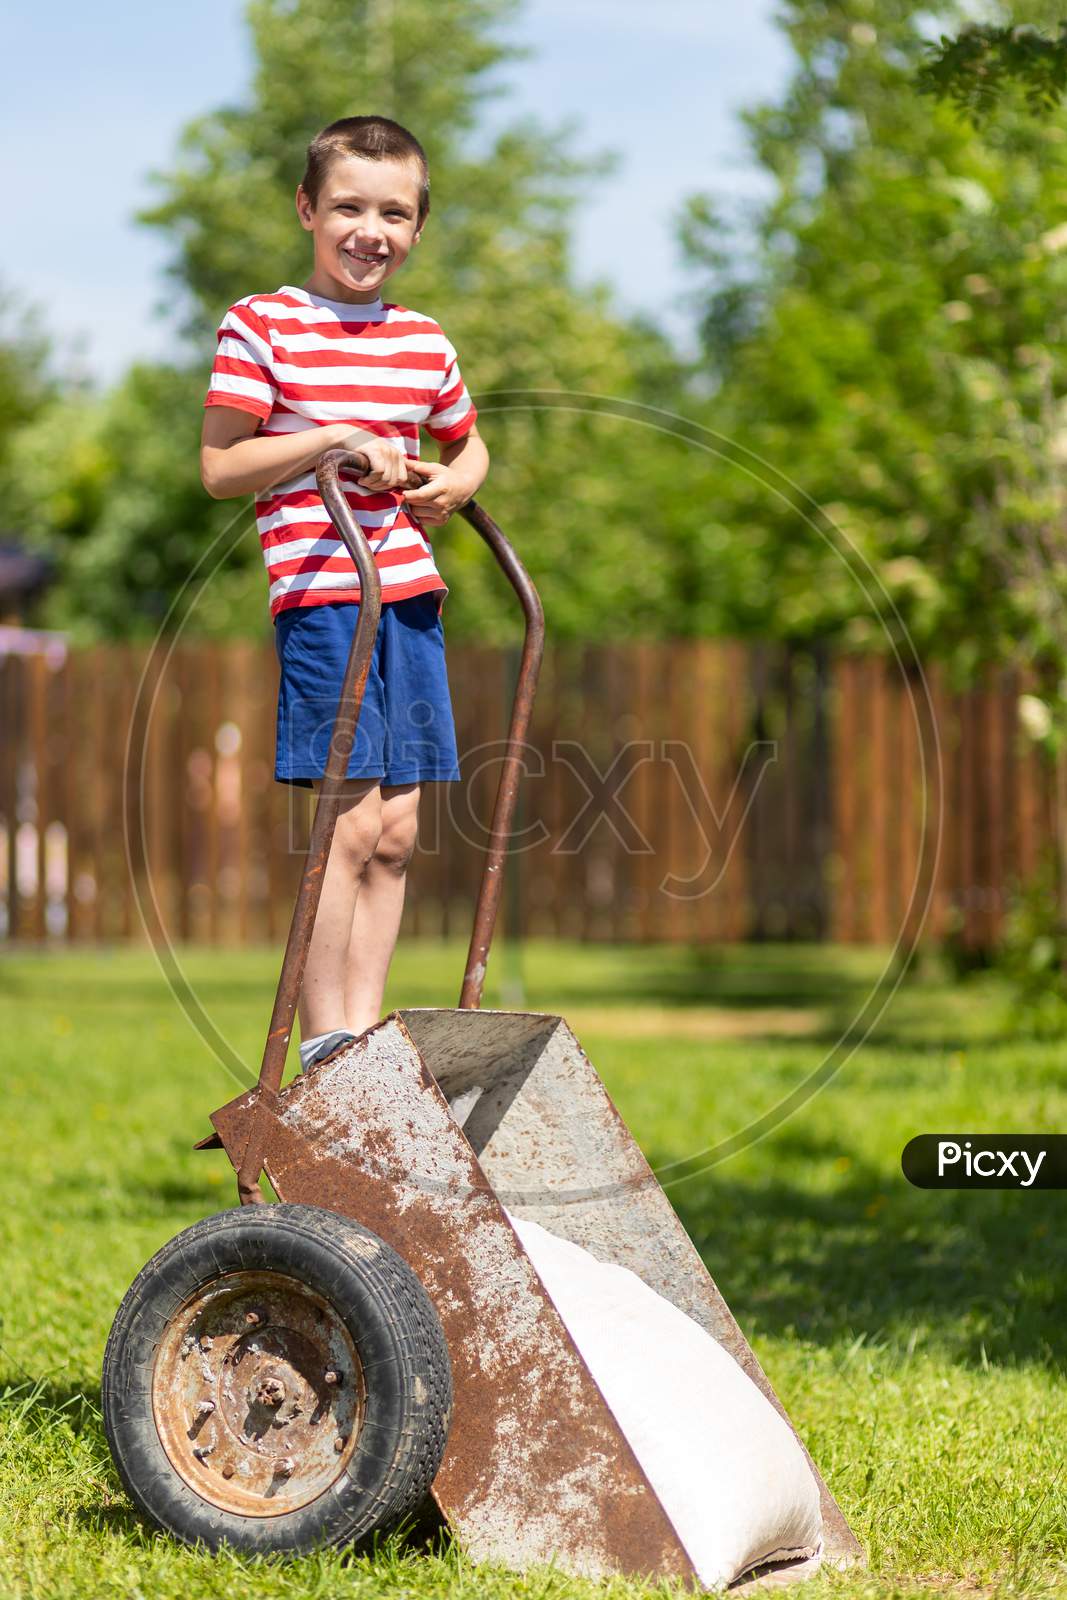 Cute Toddler Boy Playing With Big Old Wheelbarrow In Backyard In Outdoor Garden. Young Smiling Boy Playing With A Wheelbarrow In The Yard.